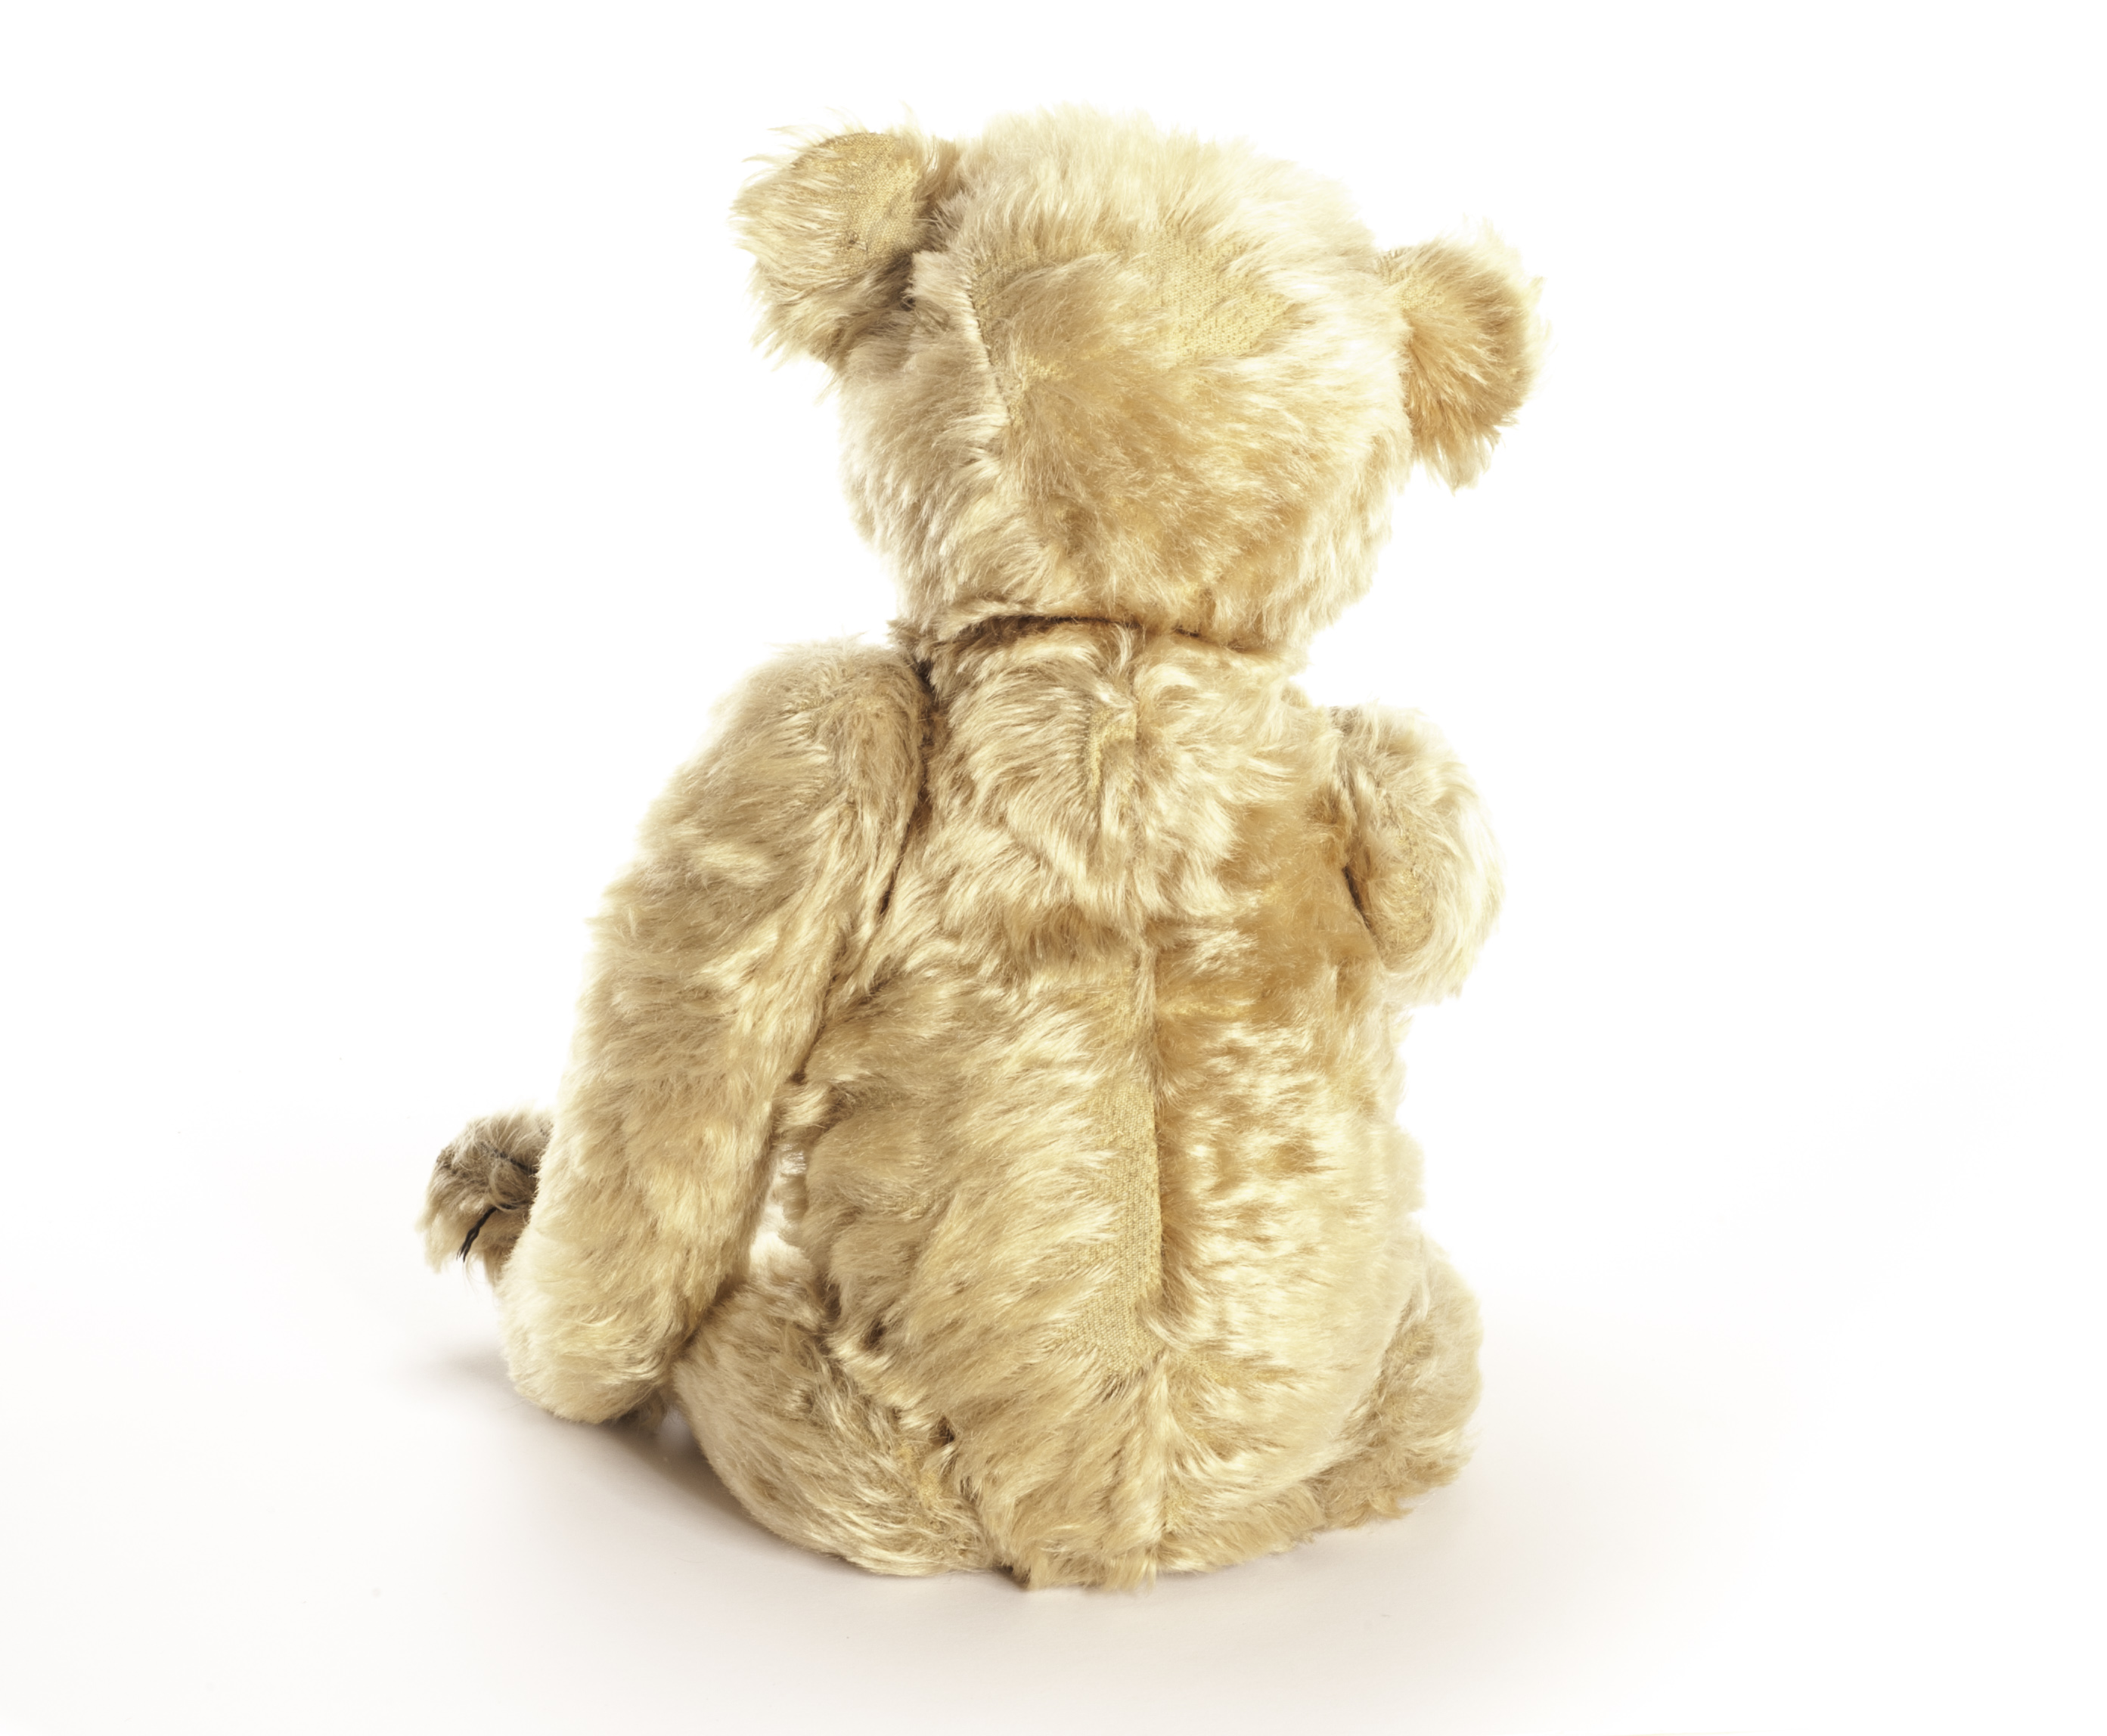 A Rare and early Steiff PAB35 Teddy Bear with elephant button, circa 1904, with apricot mohair, - Image 3 of 5